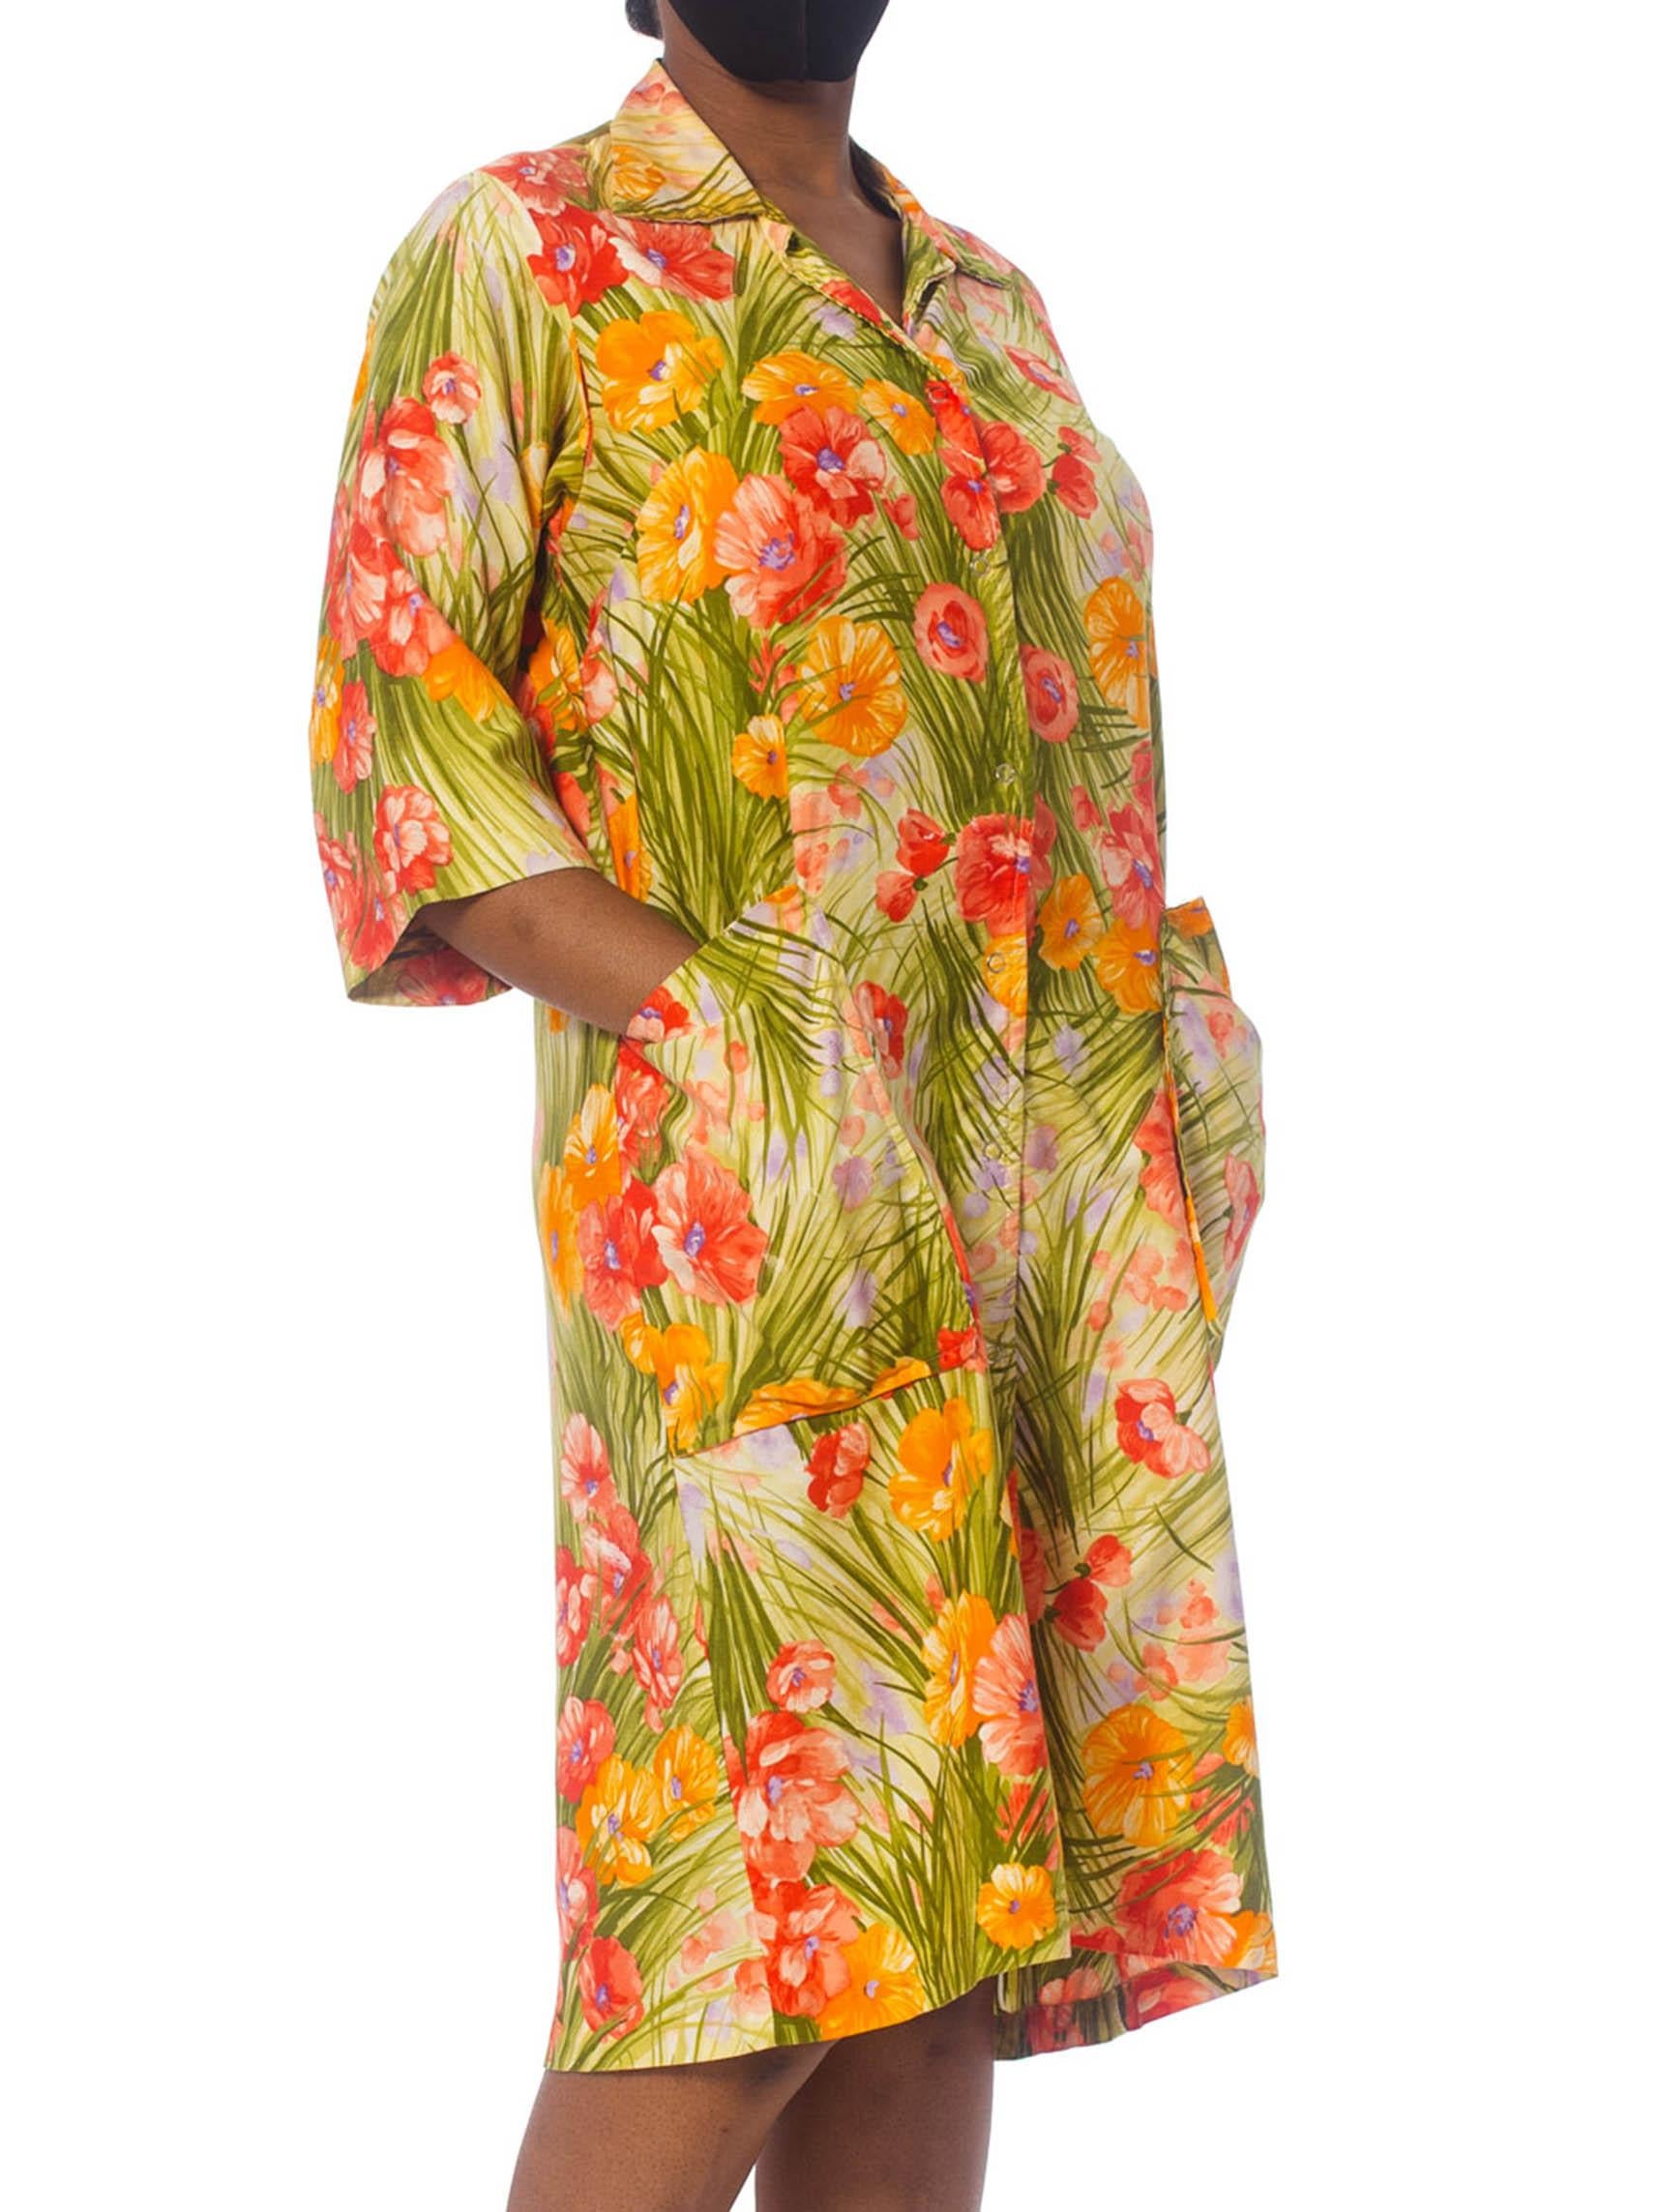 1970S SAKS FIFTH AVENUE Orange & Green Floral Cotton Sateen House Coat Dress With Patch Pockets